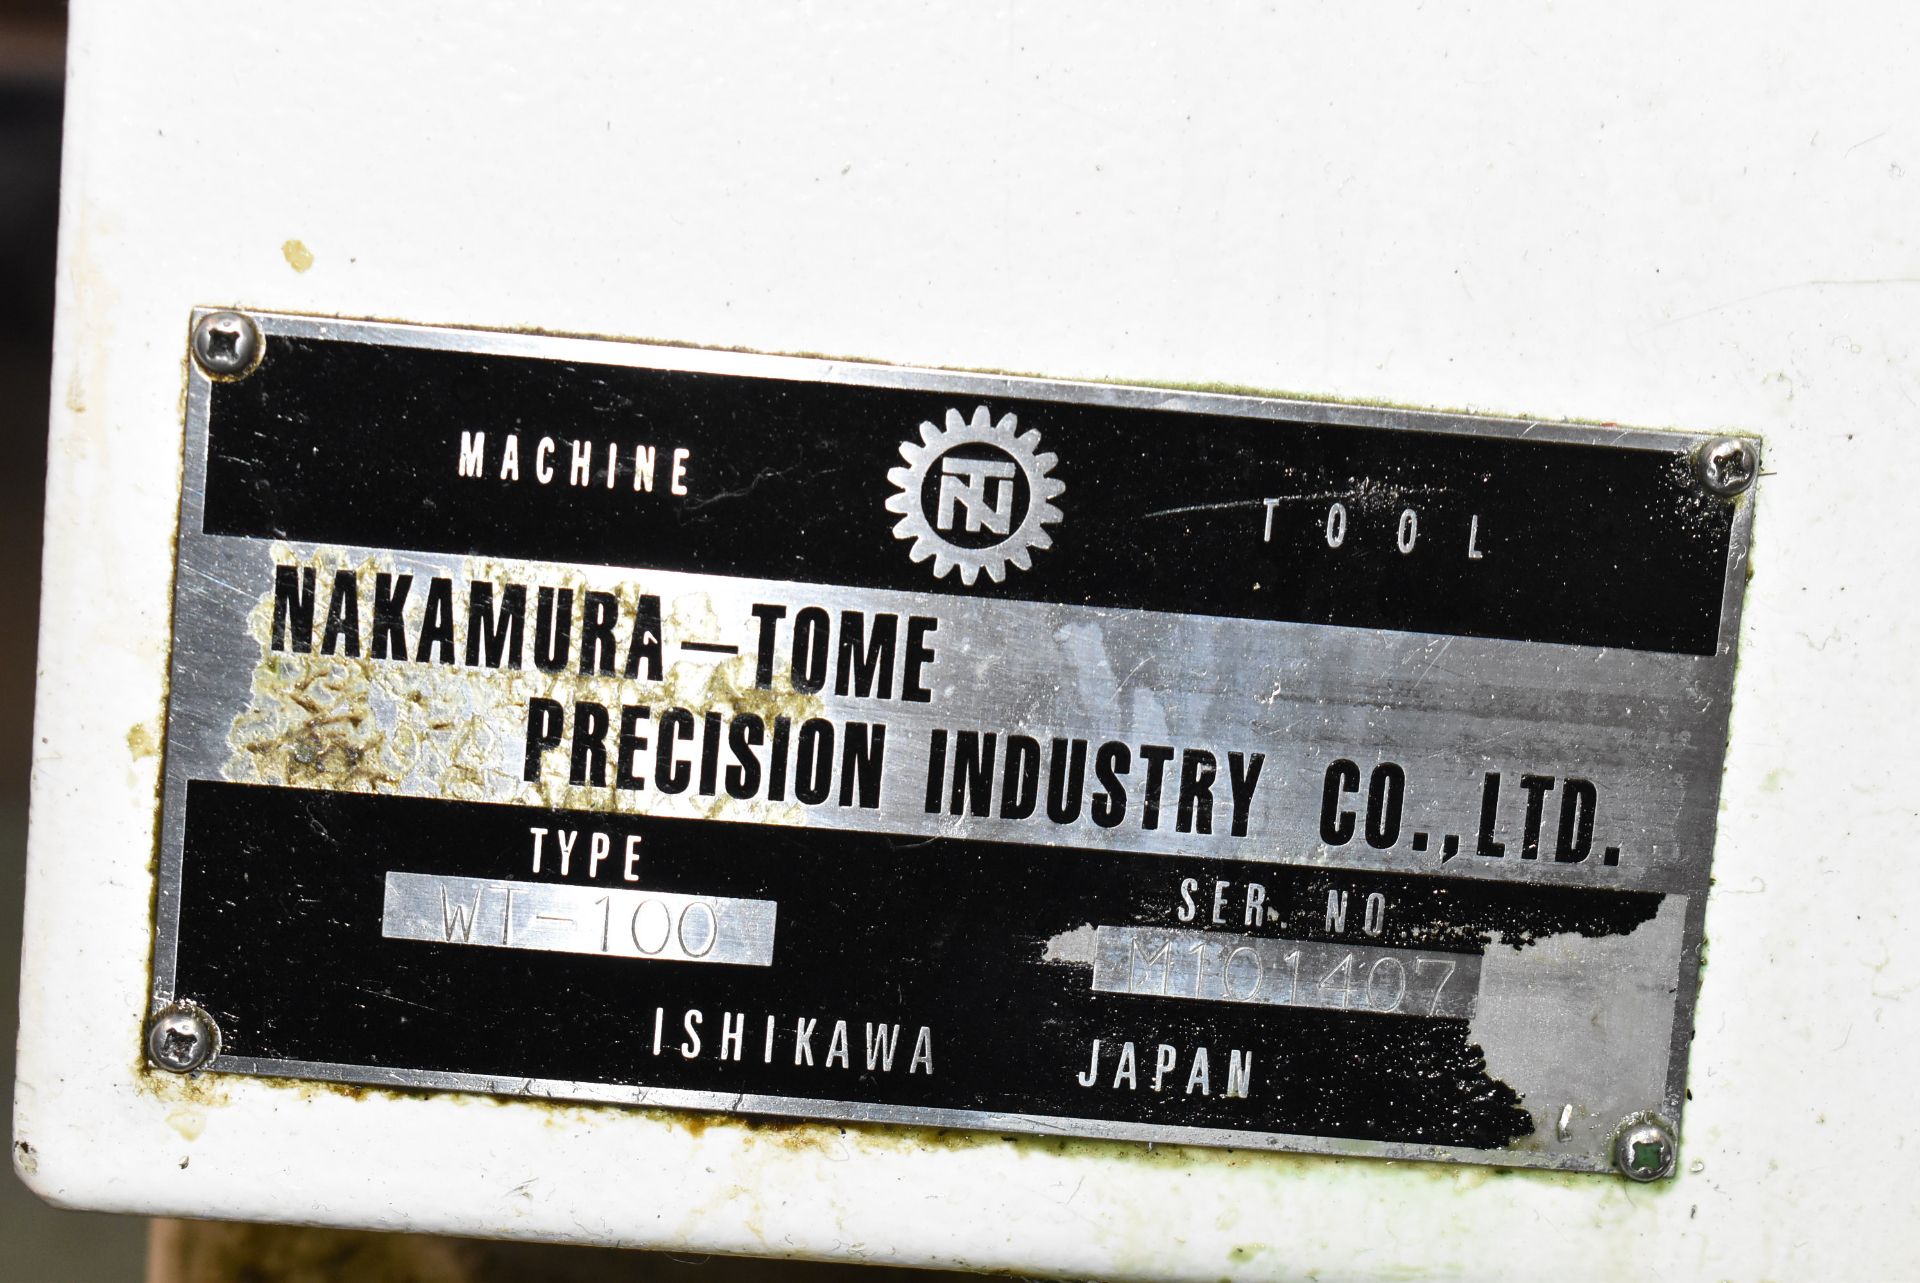 NAKAMURA-TOME (2005) WT-100 MMYS MULTI-AXIS OPPOSED SPINDLE AND TWIN TURRET CNC MULTI-TASKING CENTER - Image 16 of 17